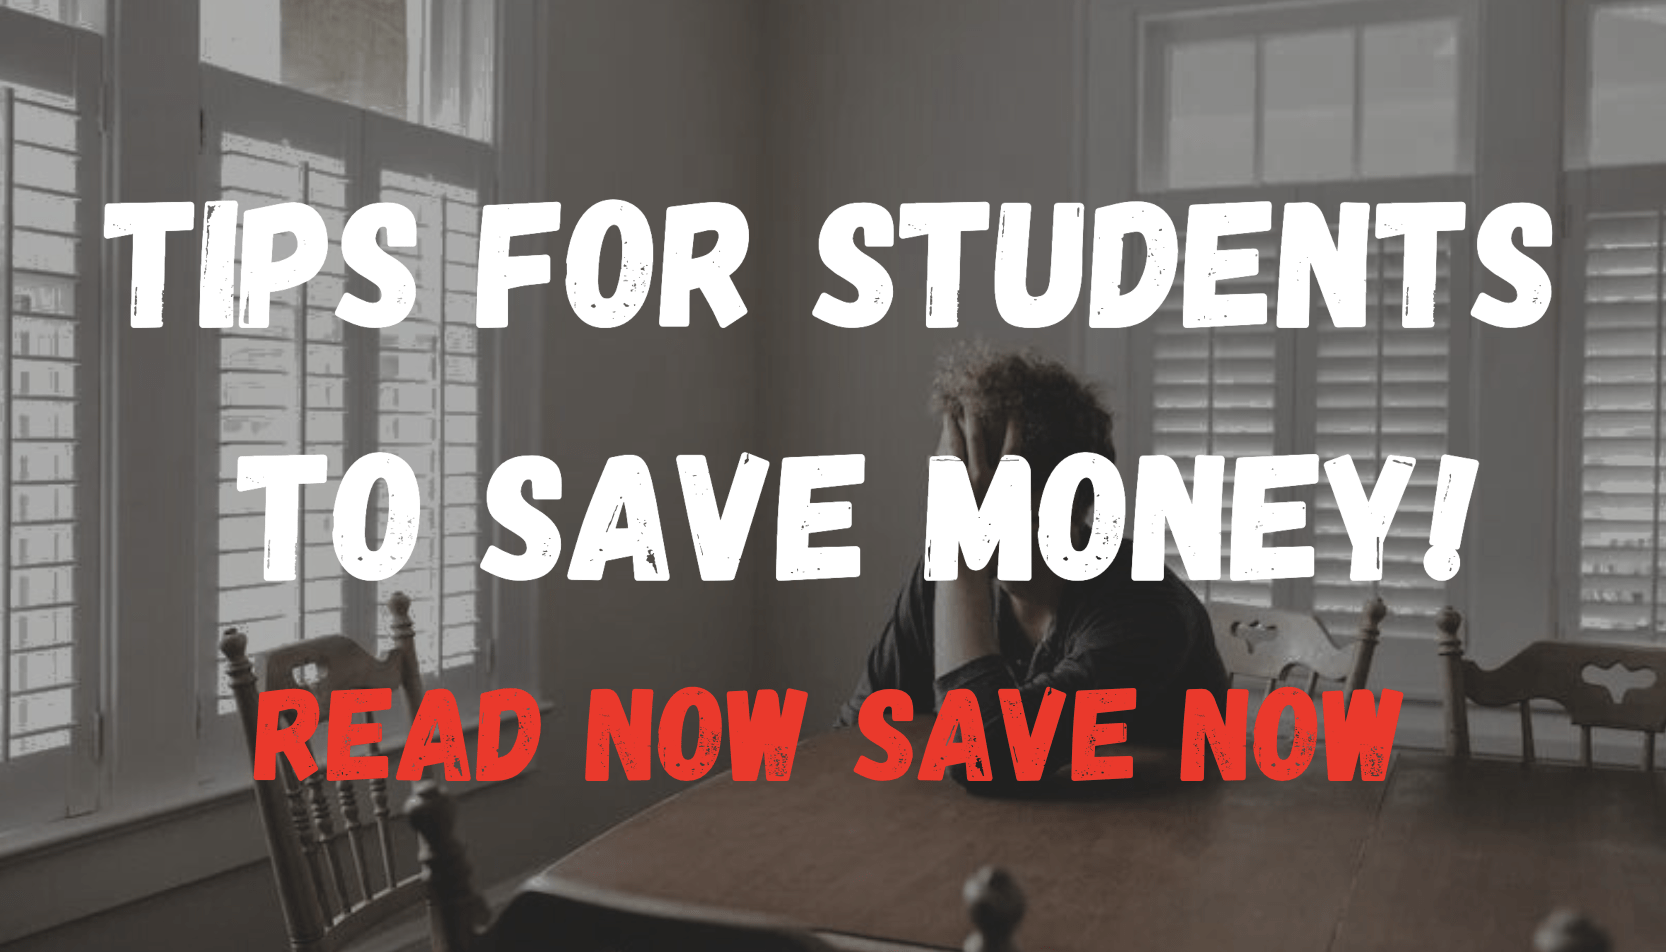 Tips for students to Save Money